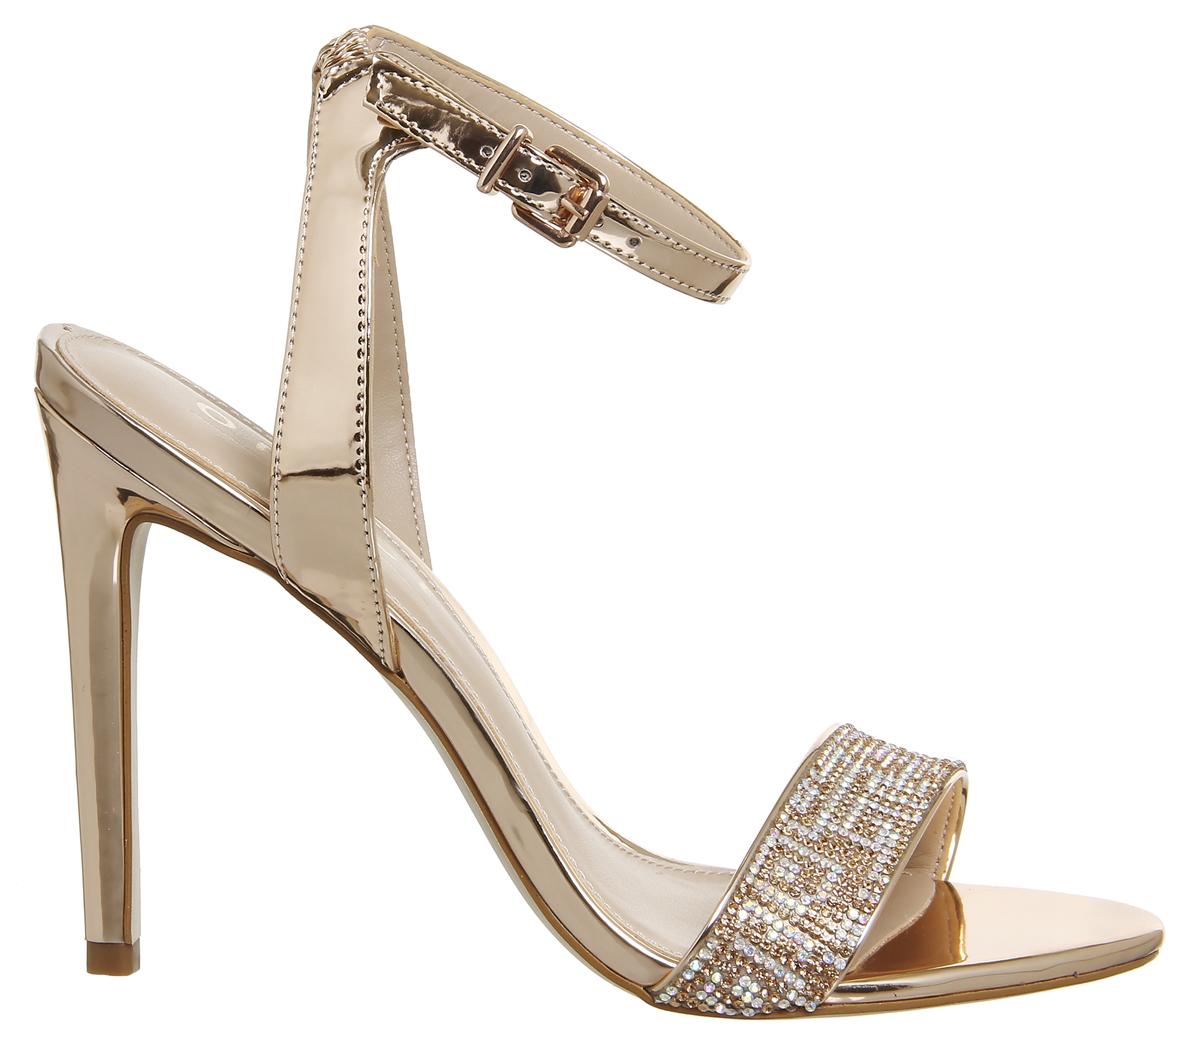 OFFICE Alana Single Sole Sandals Rose Gold With Diamante Trim - High Heels